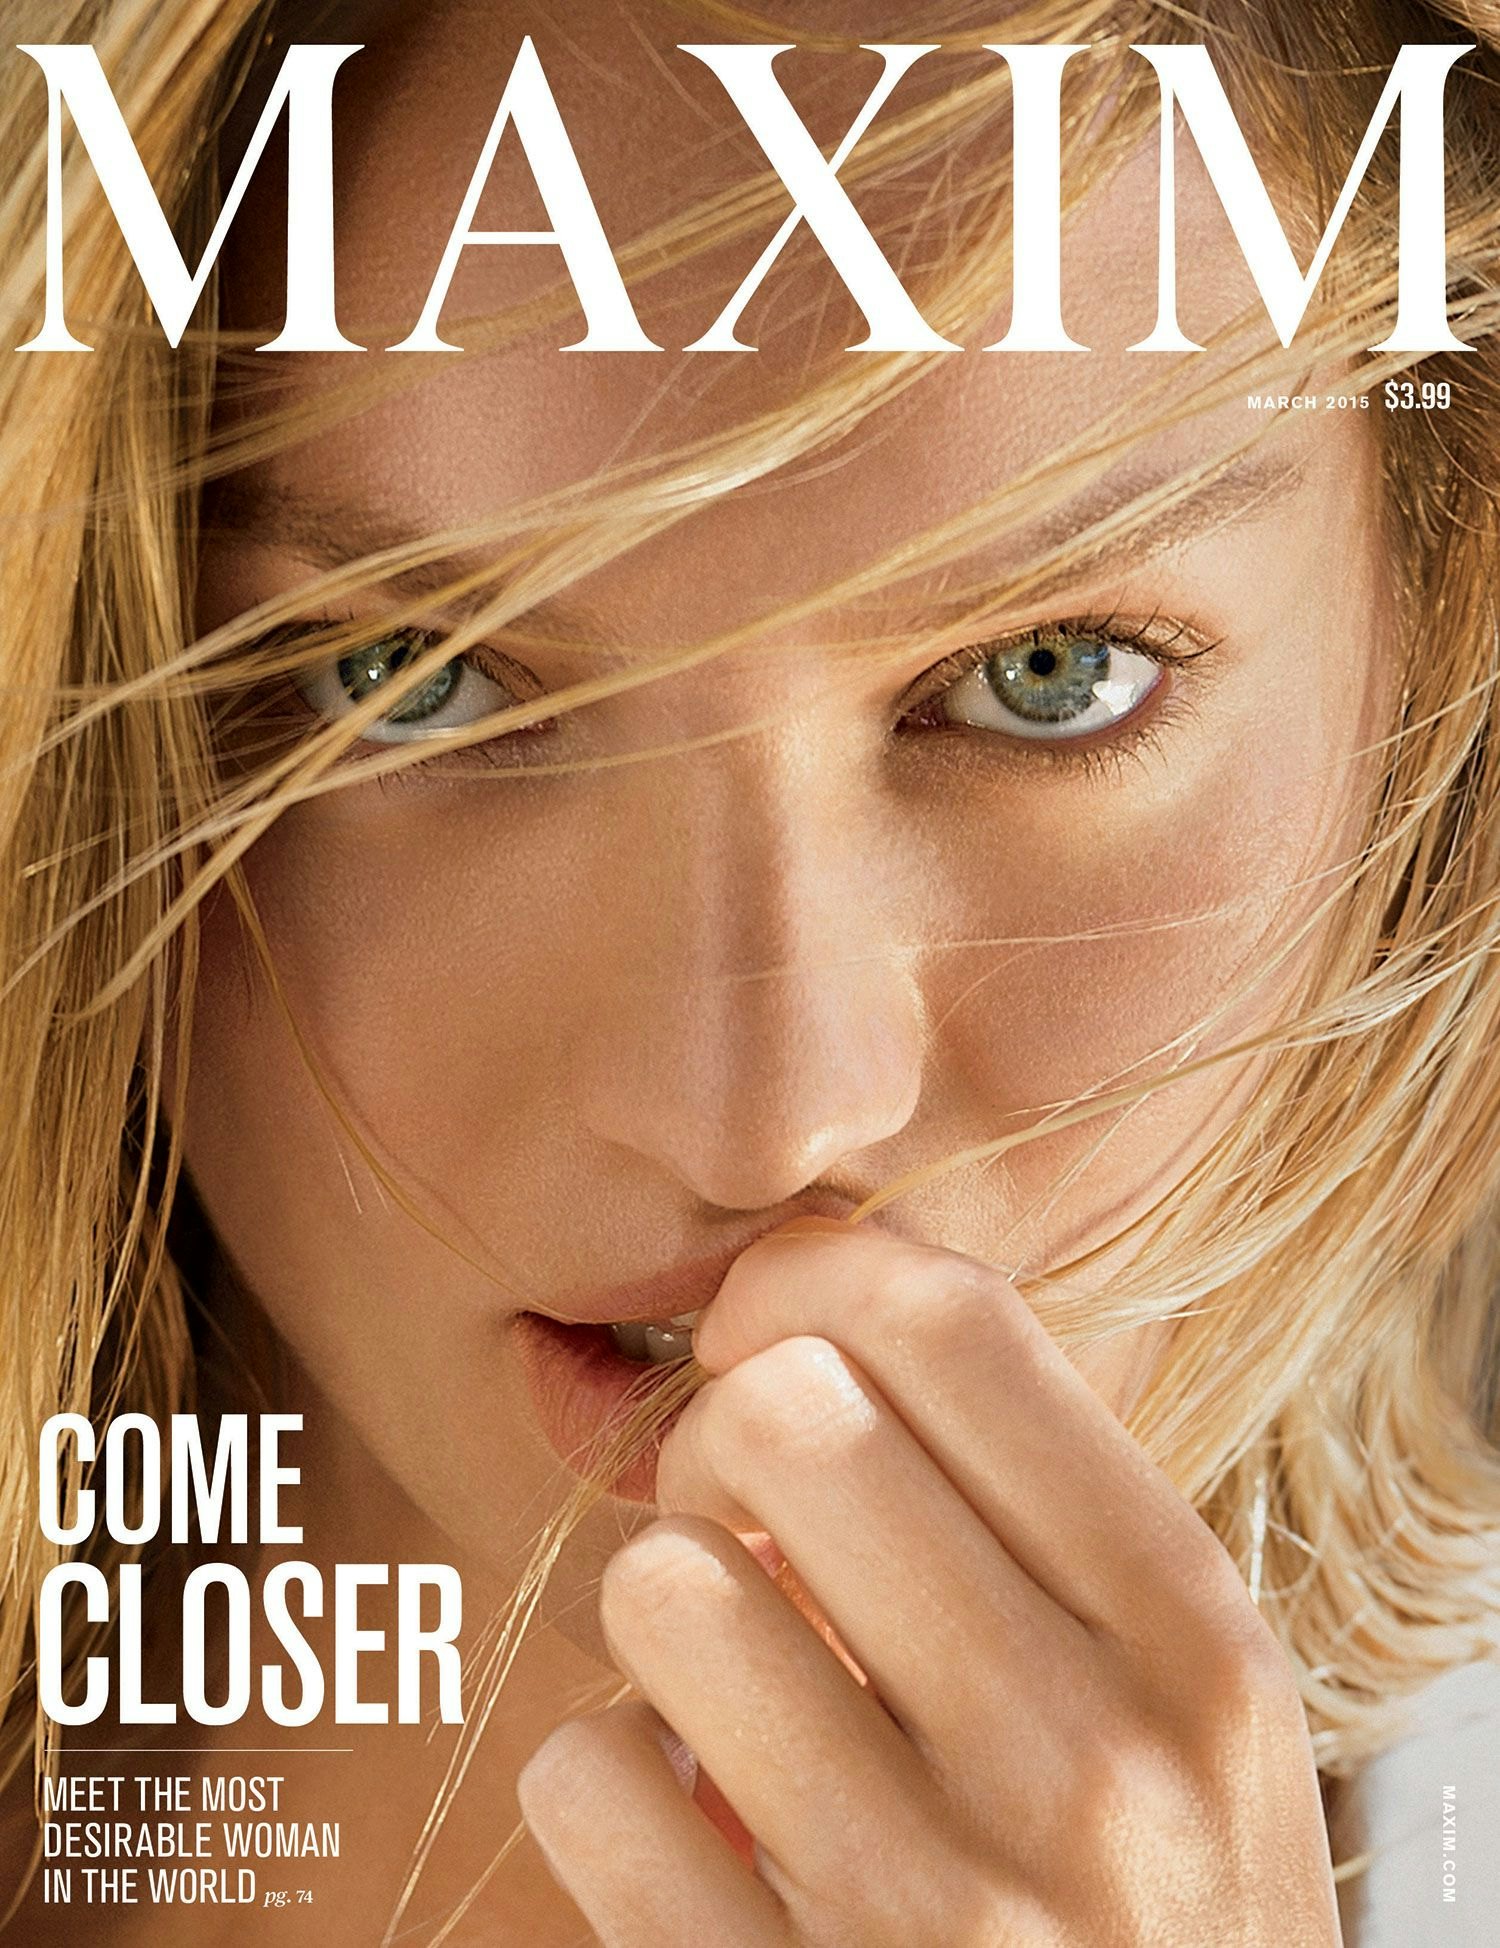 Candice Swanepoel's 'Maxim' Cover Introduces New Women-Friendly 